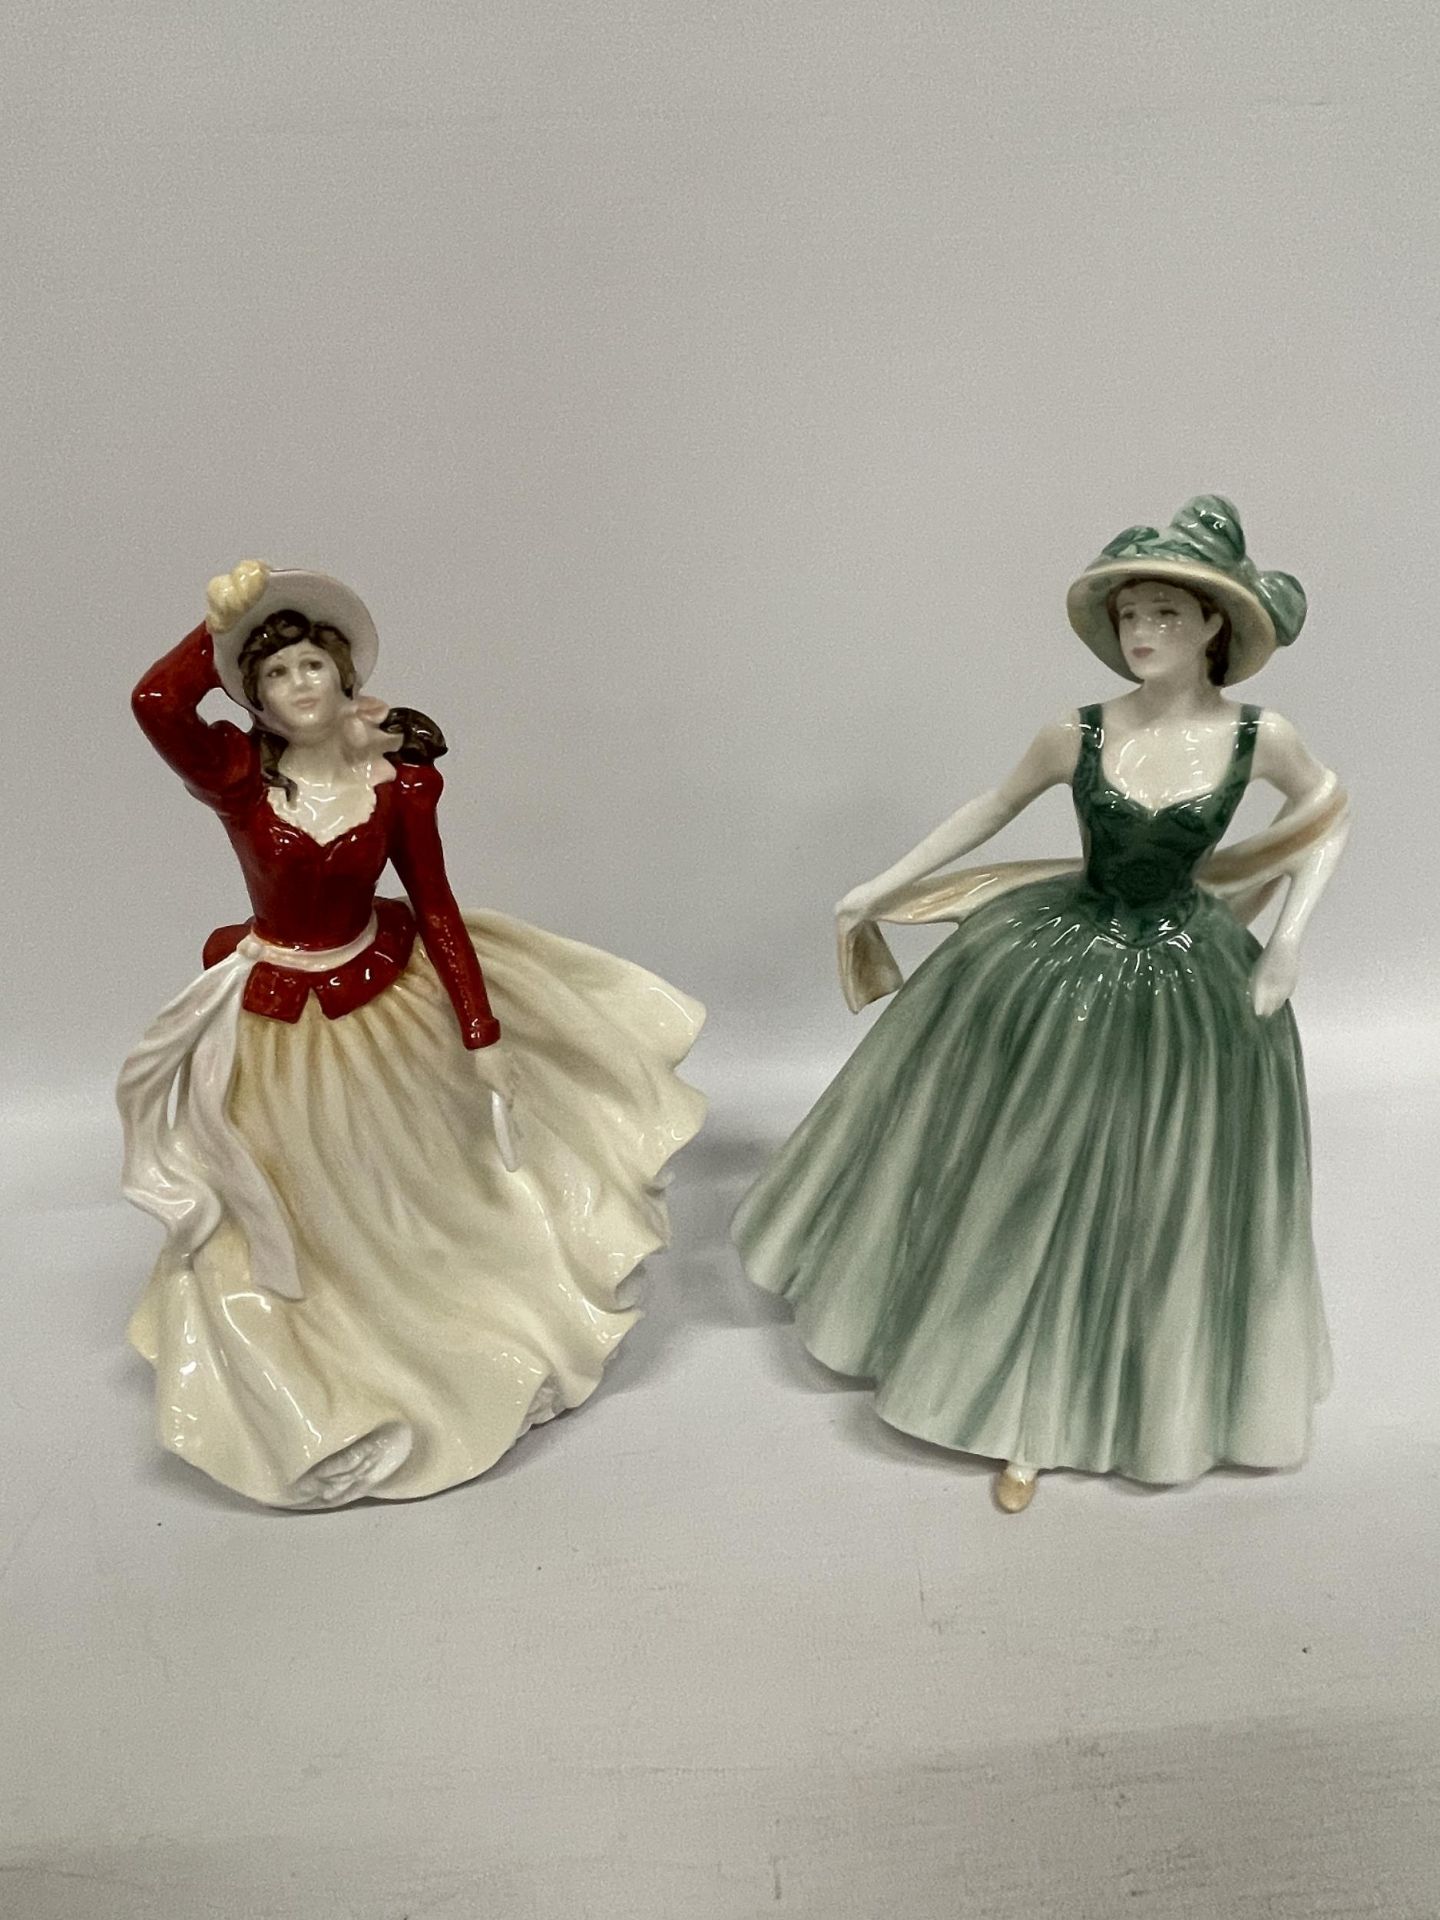 TWO ROYAL DOULTON LADY FIGURES - 'ALICE' LADY OF THE YEAR 1999 HN4003 & 'ELEANOR' LADY OF THE YEAR